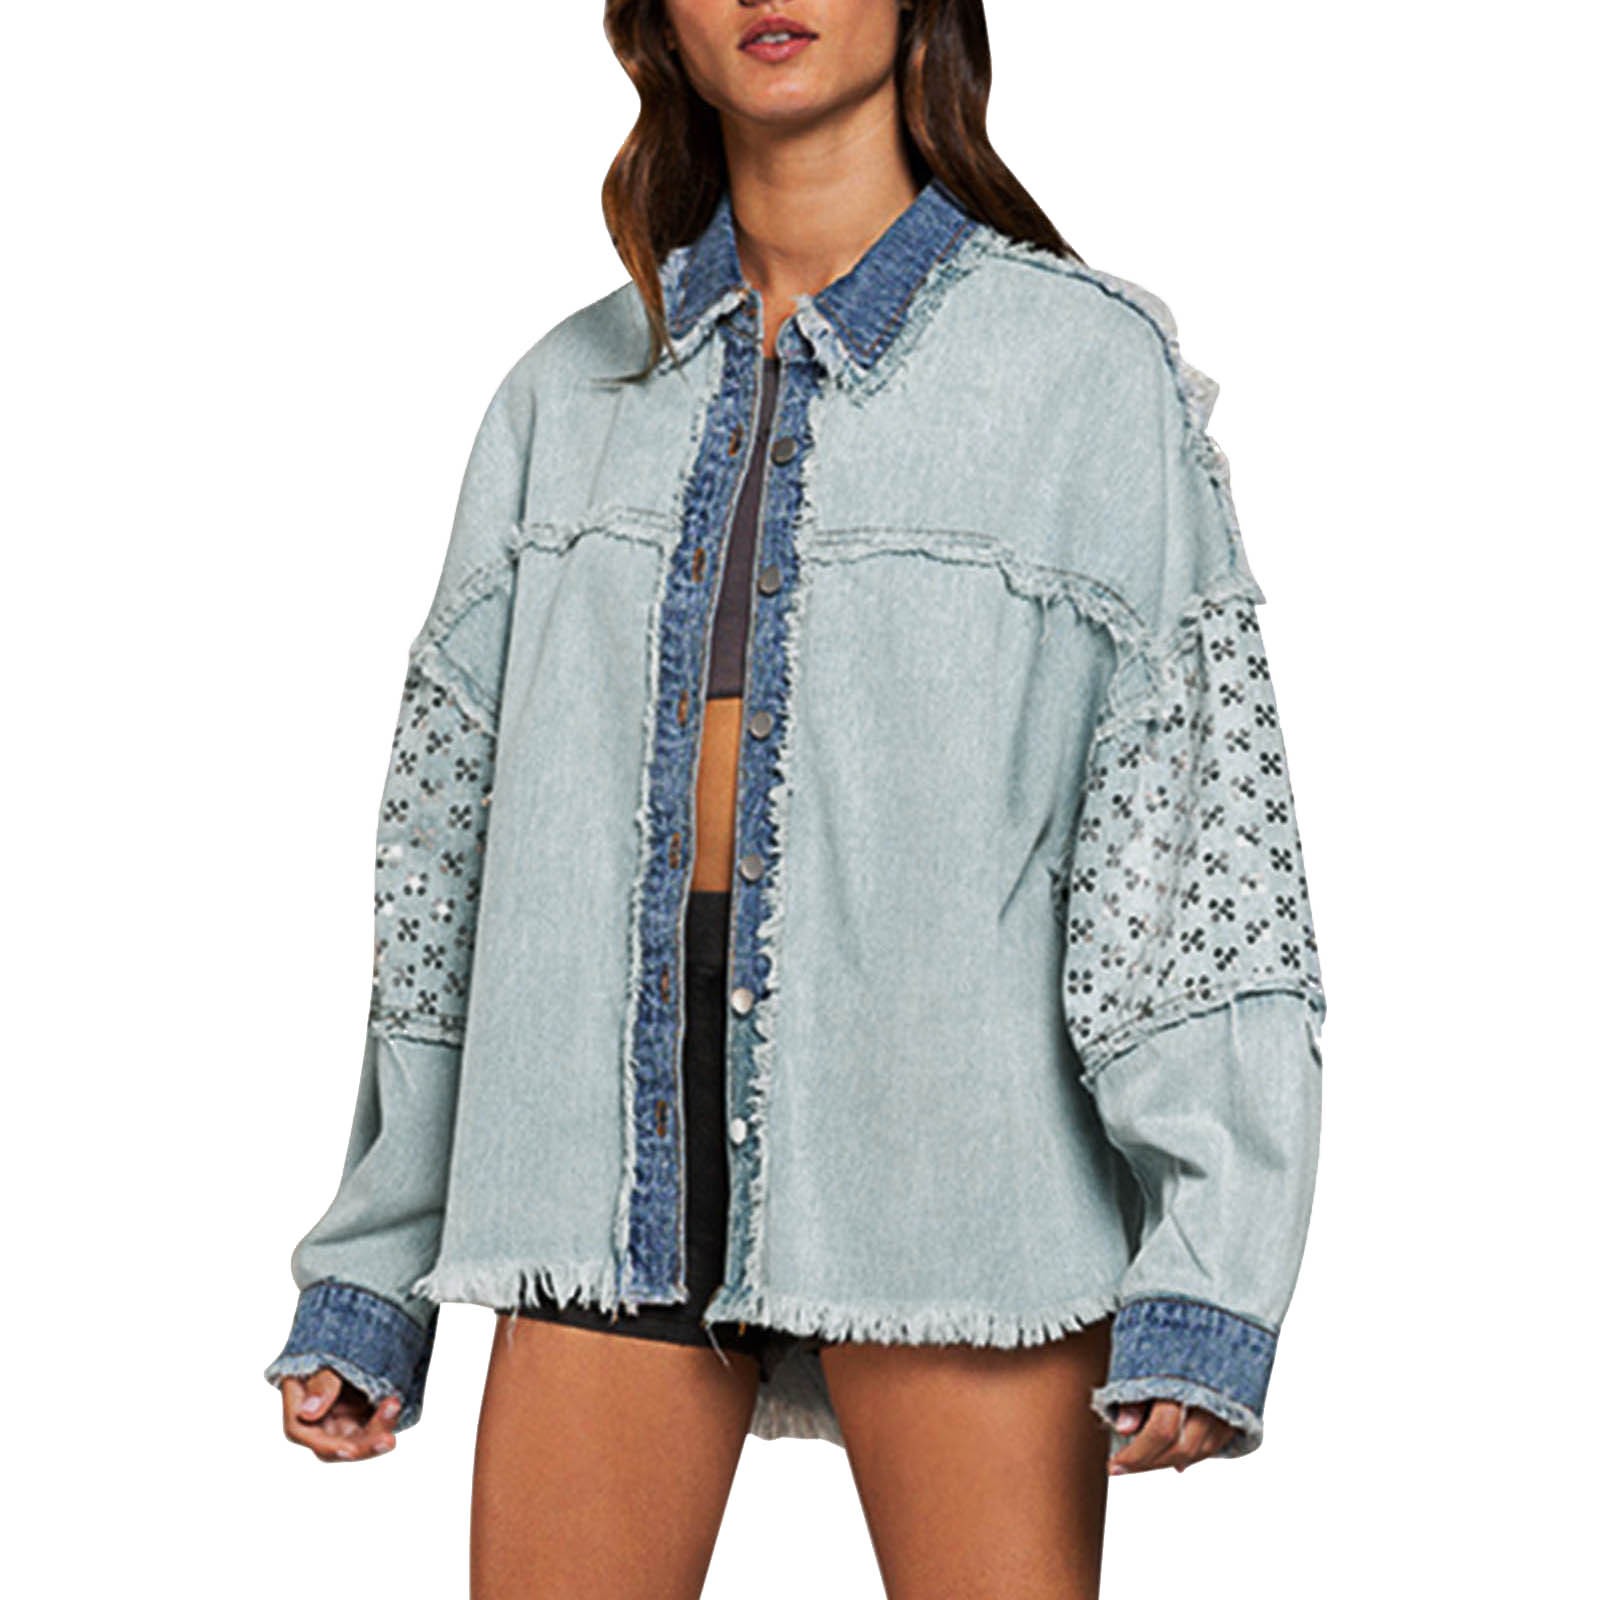 Lightweight Casual Jacket Women plus Size Womens Outdoor Vest Women's Basic Button Down Fitted Long Sleeves Denim Jean Jacket Womens Insulated Hunting Jacket - image 3 of 9